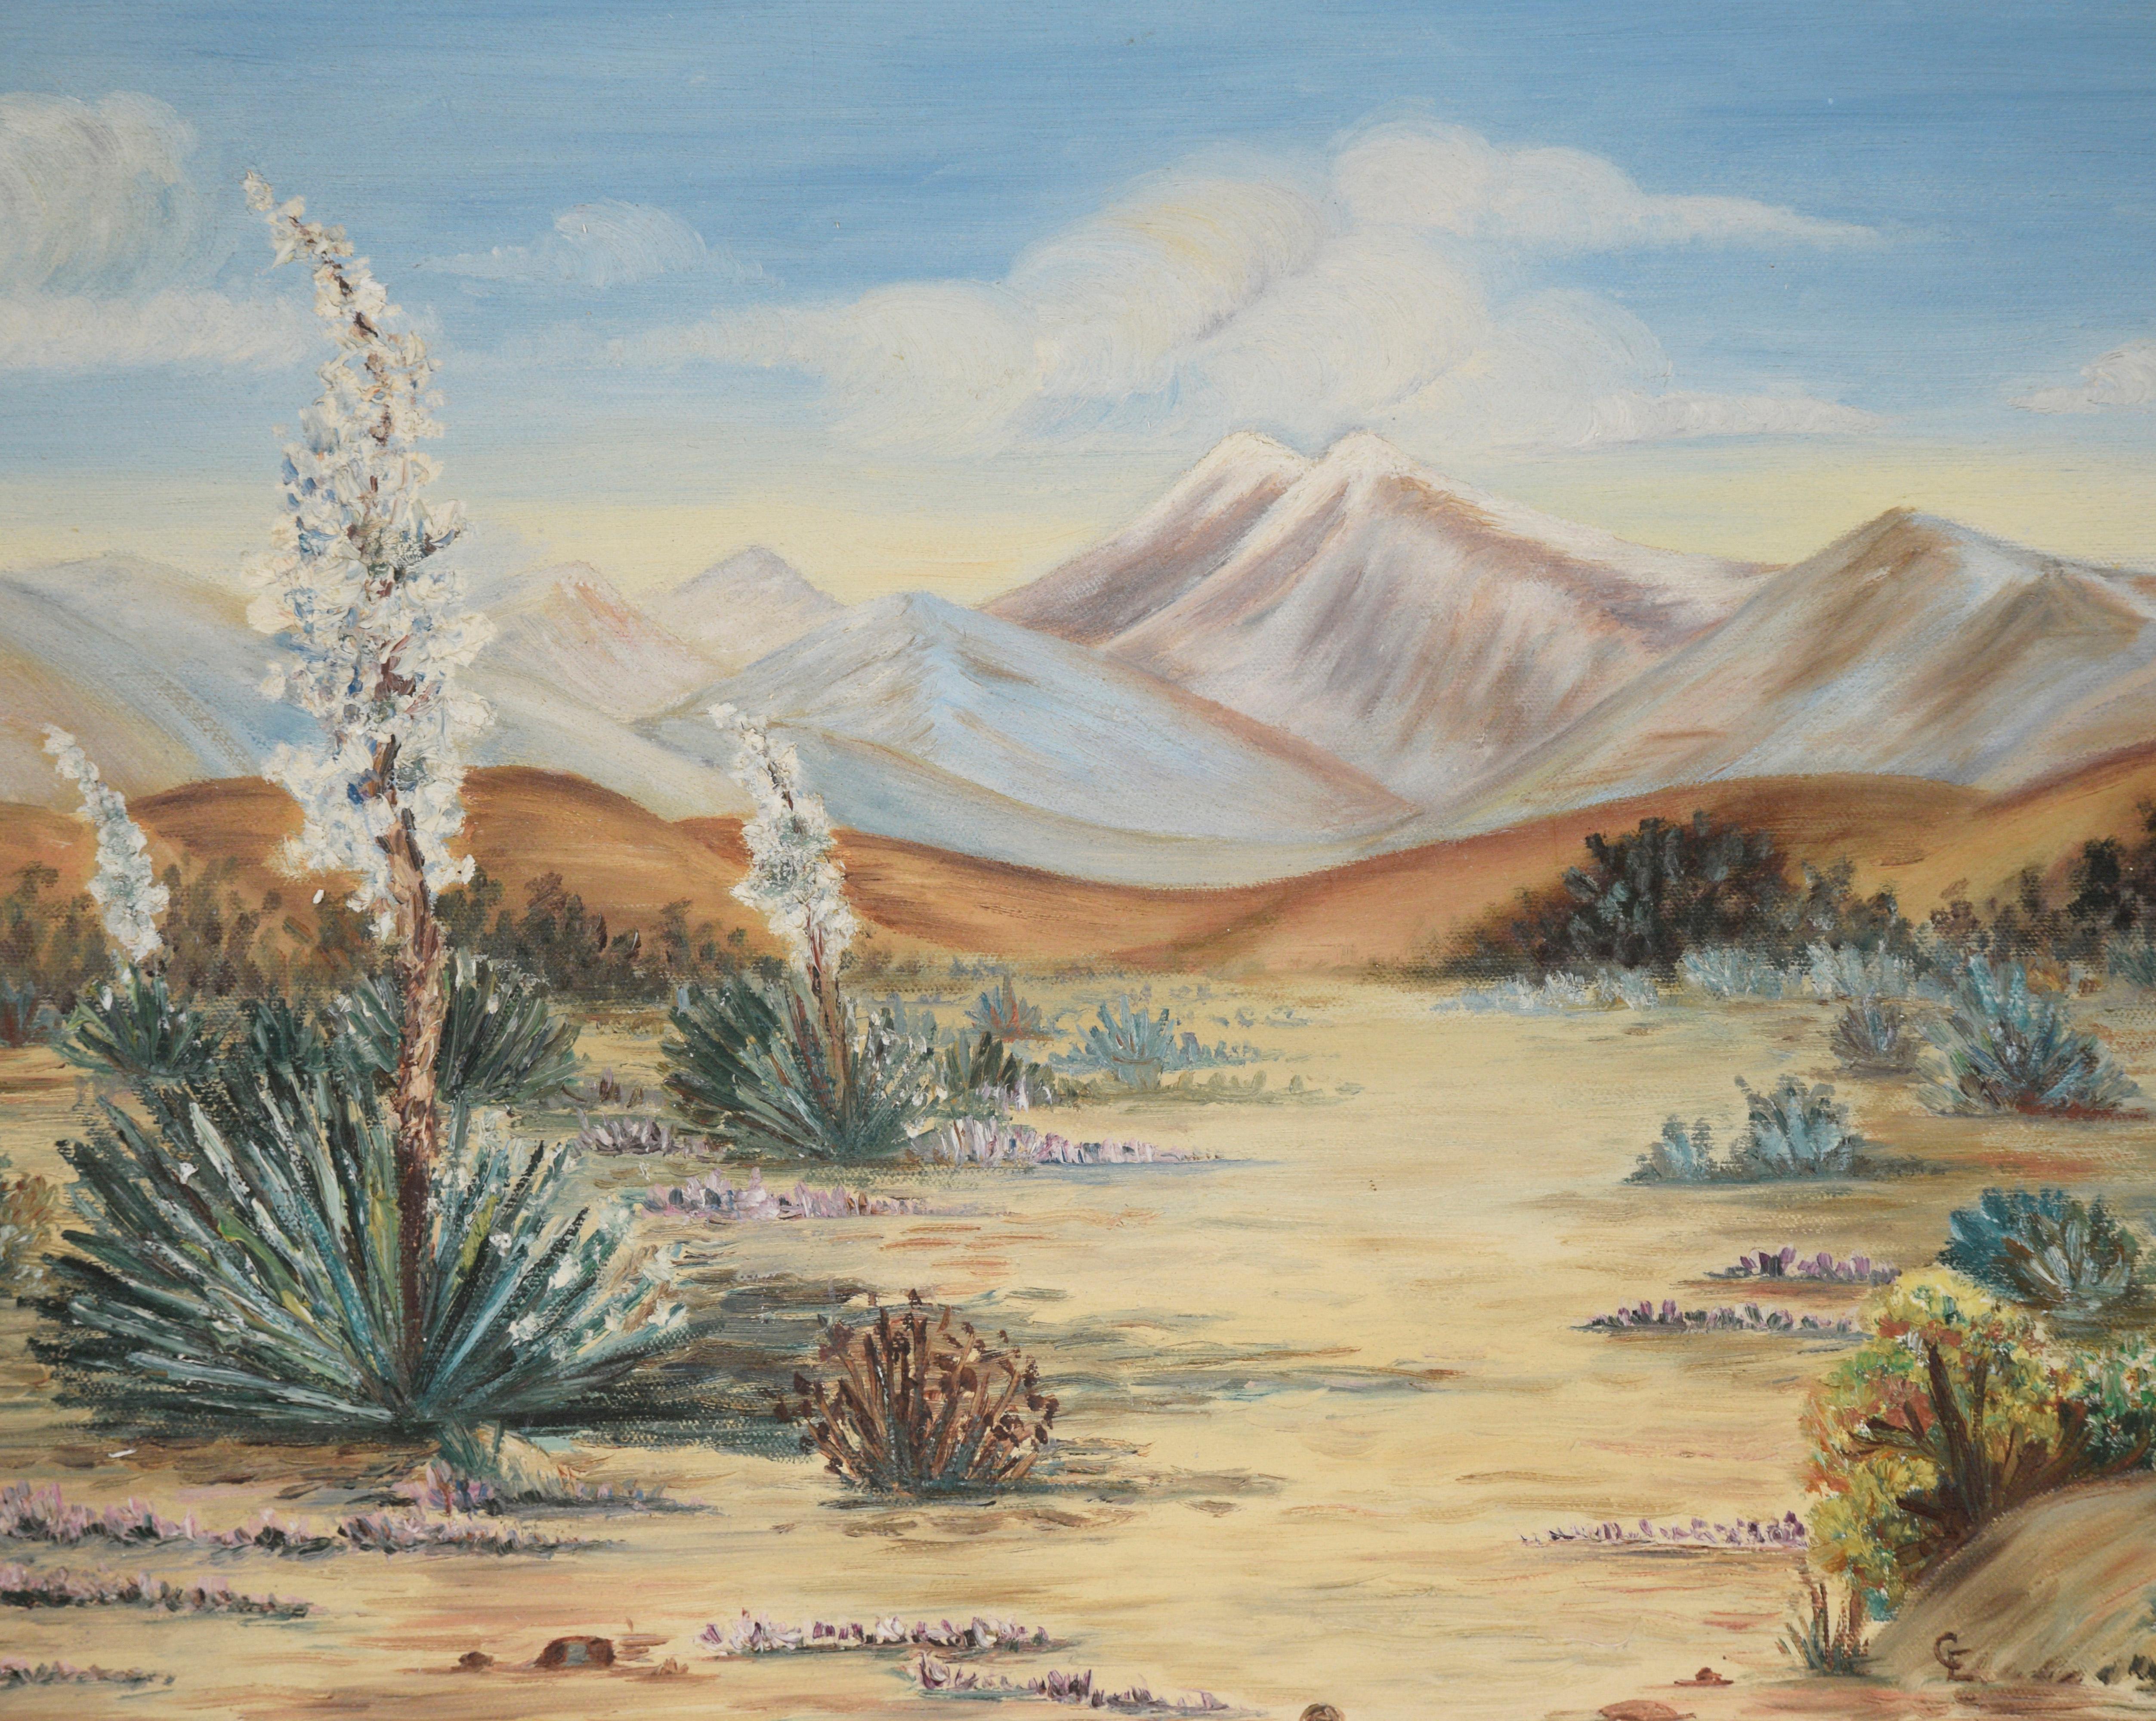 Desert Landscape with Agave and Yucca - Oil on Canvas - Painting by Unknown